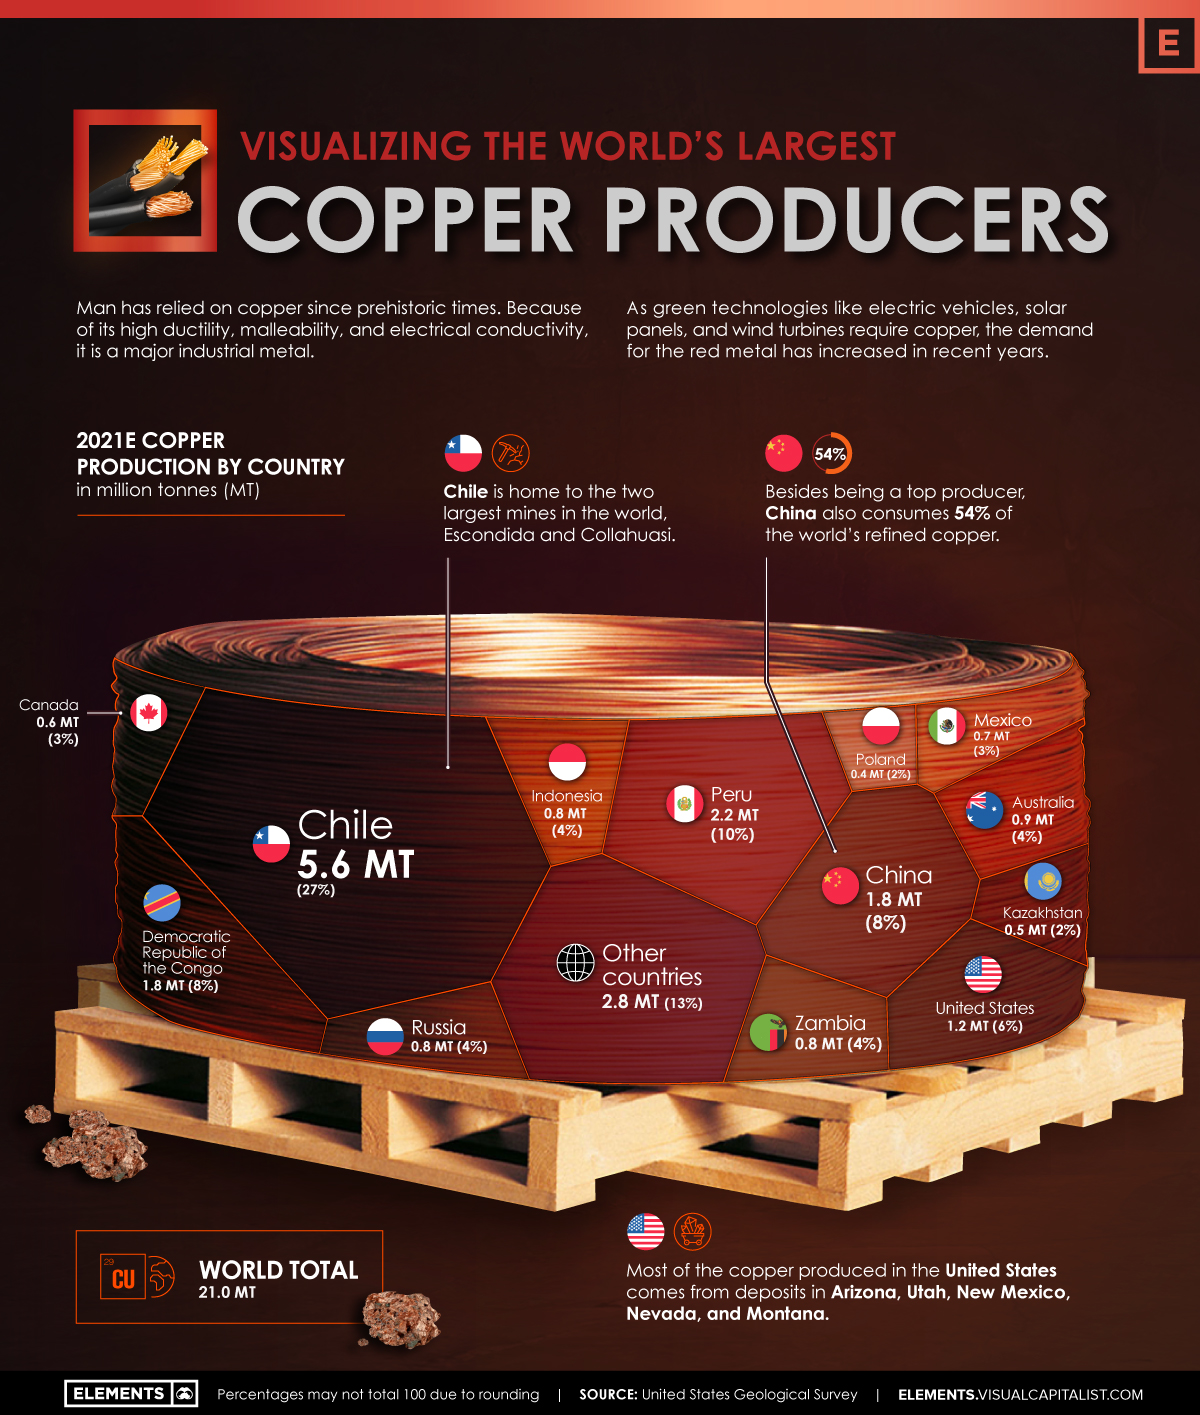 Visualizing-the-Worlds-Largest-Copper-Producers-Nov-30.jpg